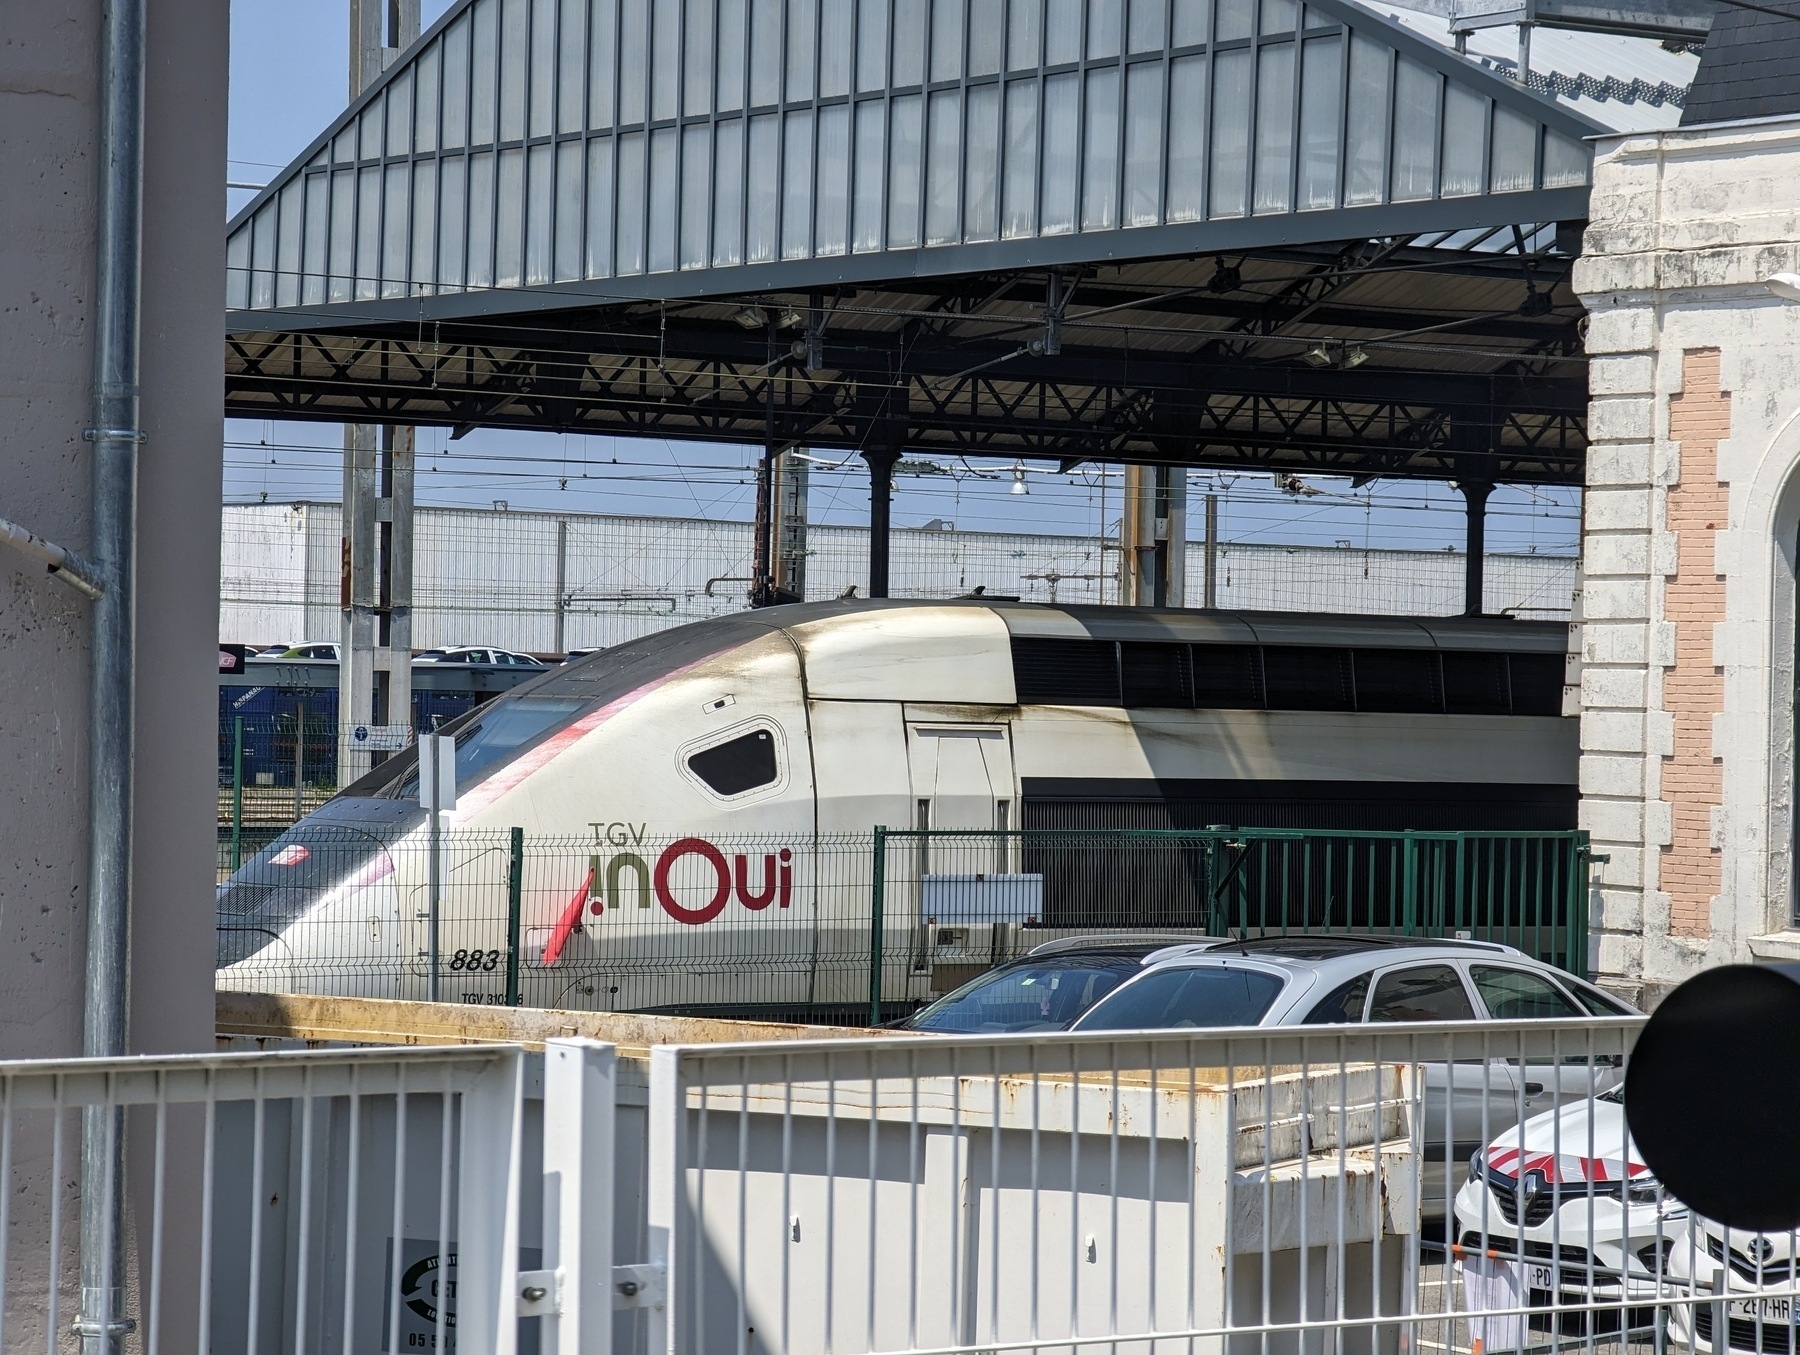 Front of a TGV locomotive with livery Inoui under the canopy of Hendaye station.